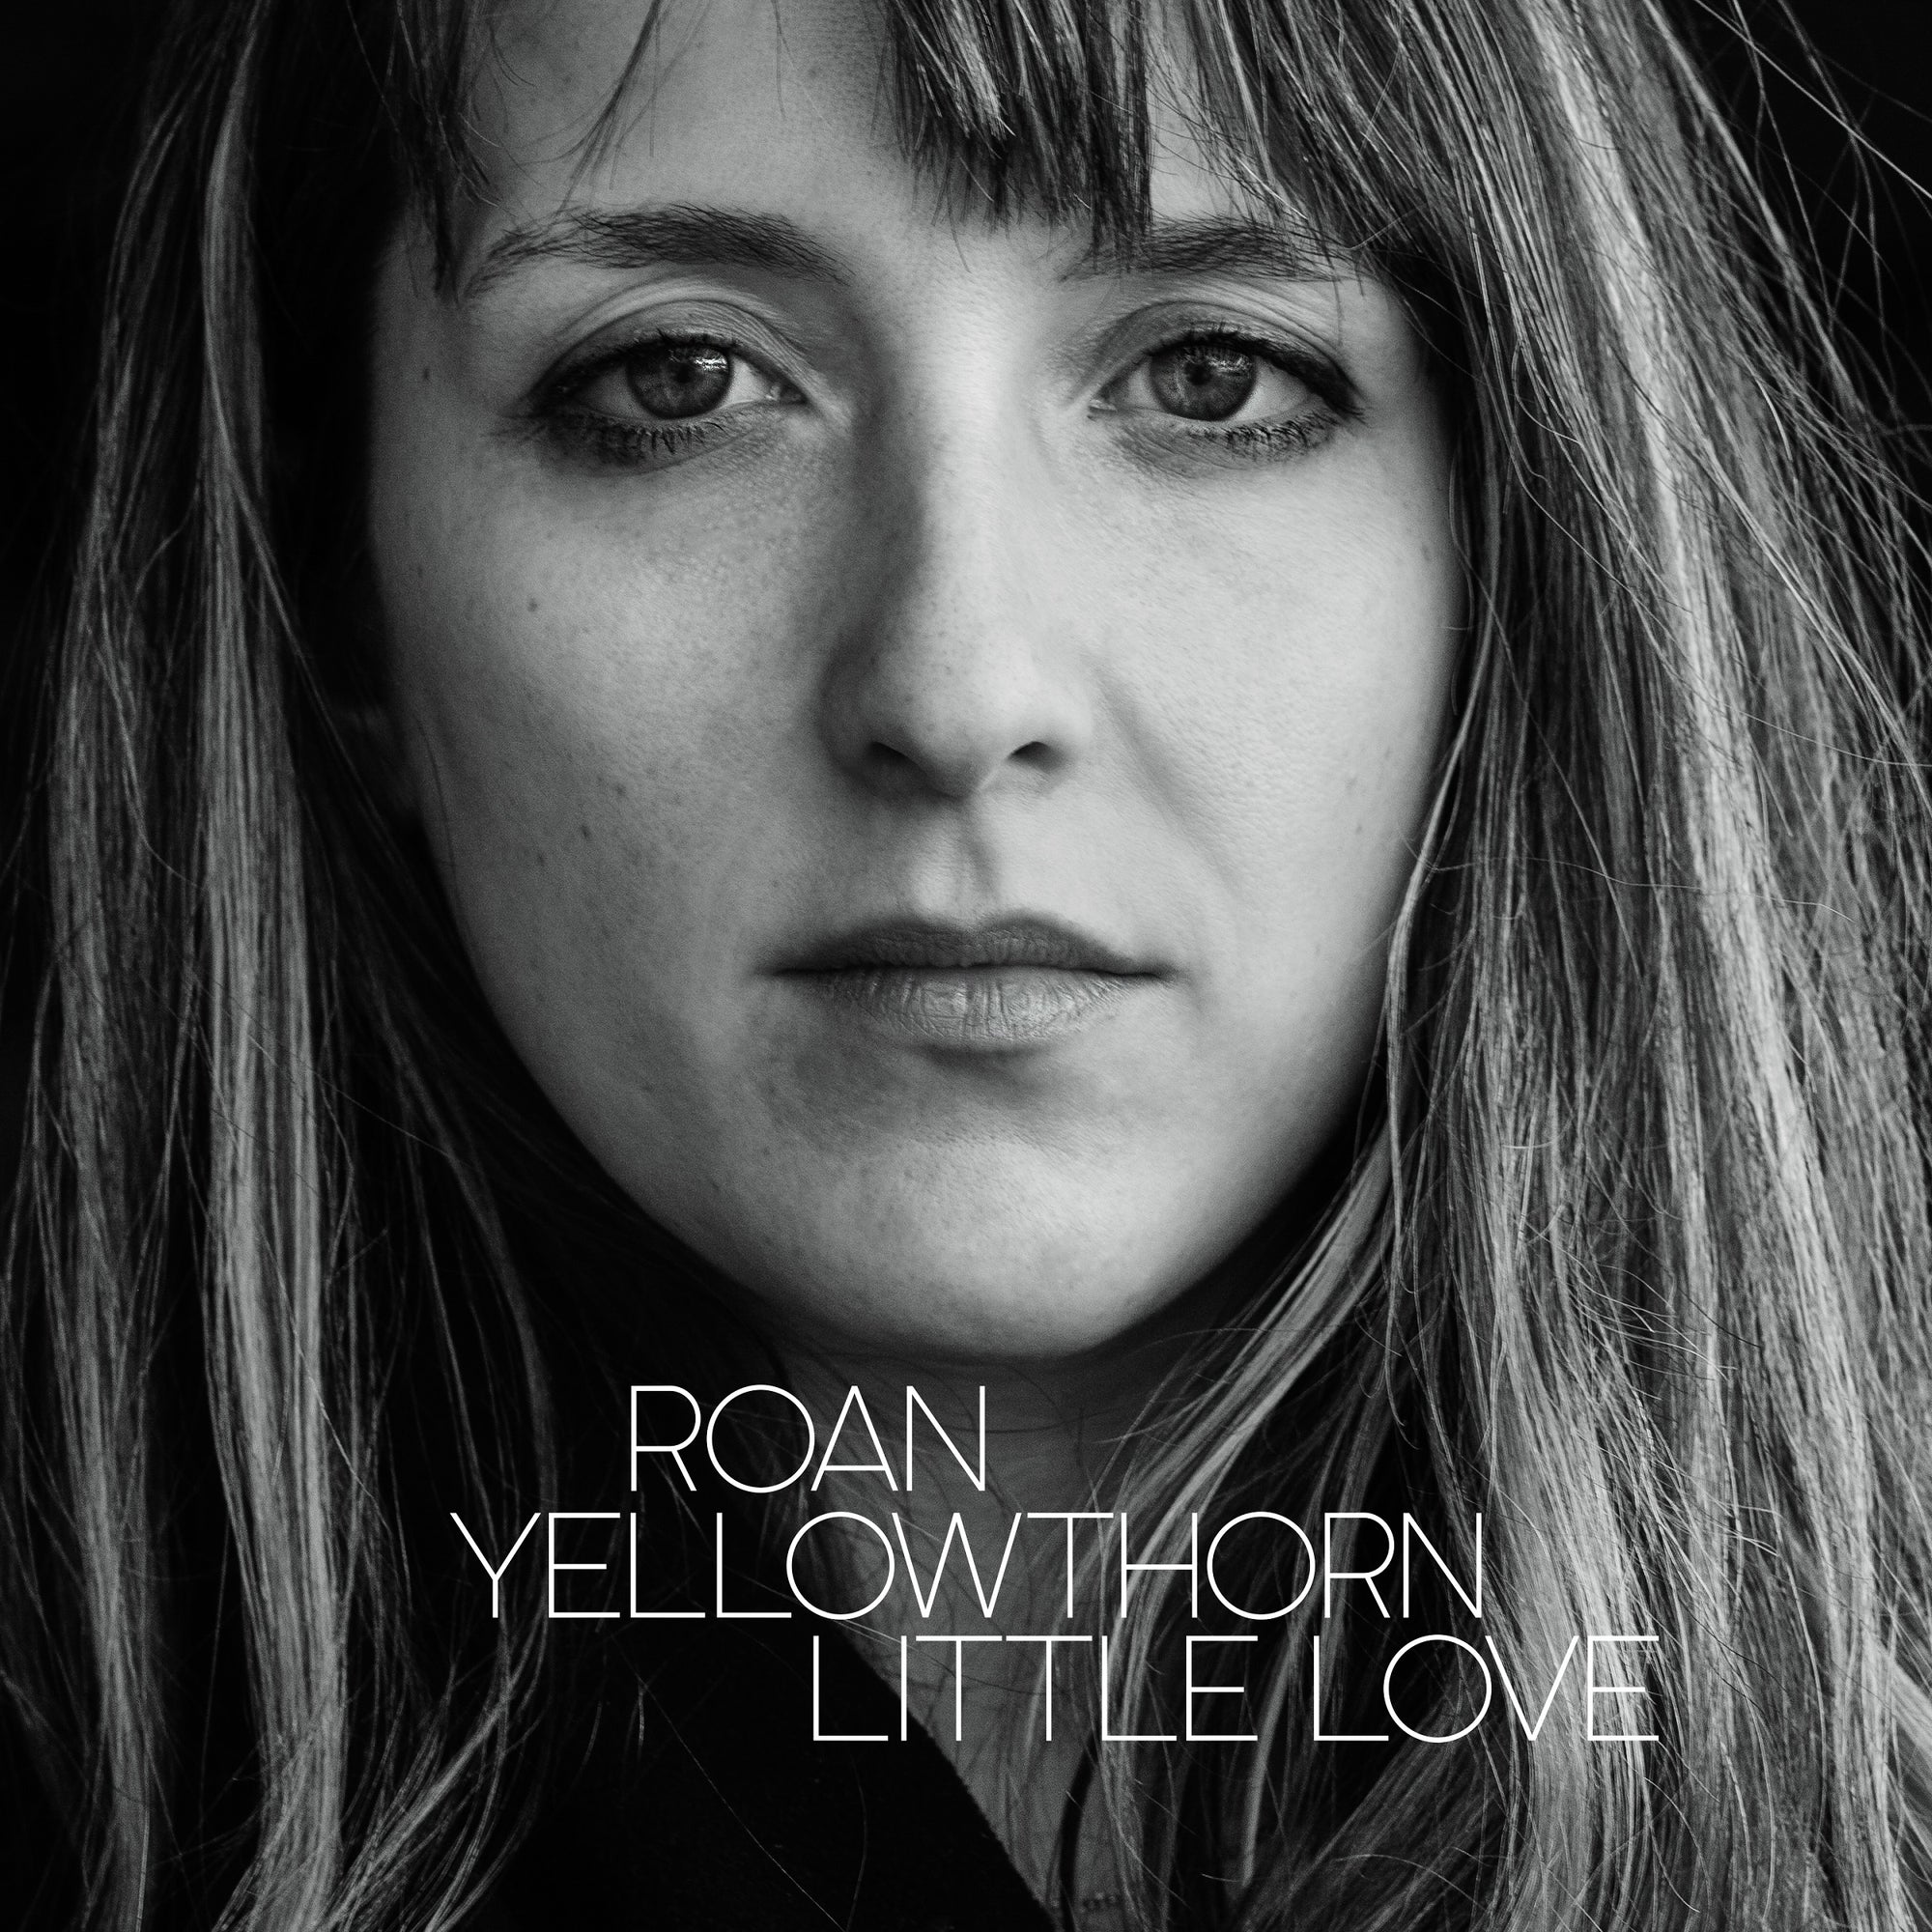 Roan Rellowthorn Announces Upcoming Album With New Single, "Little Love"